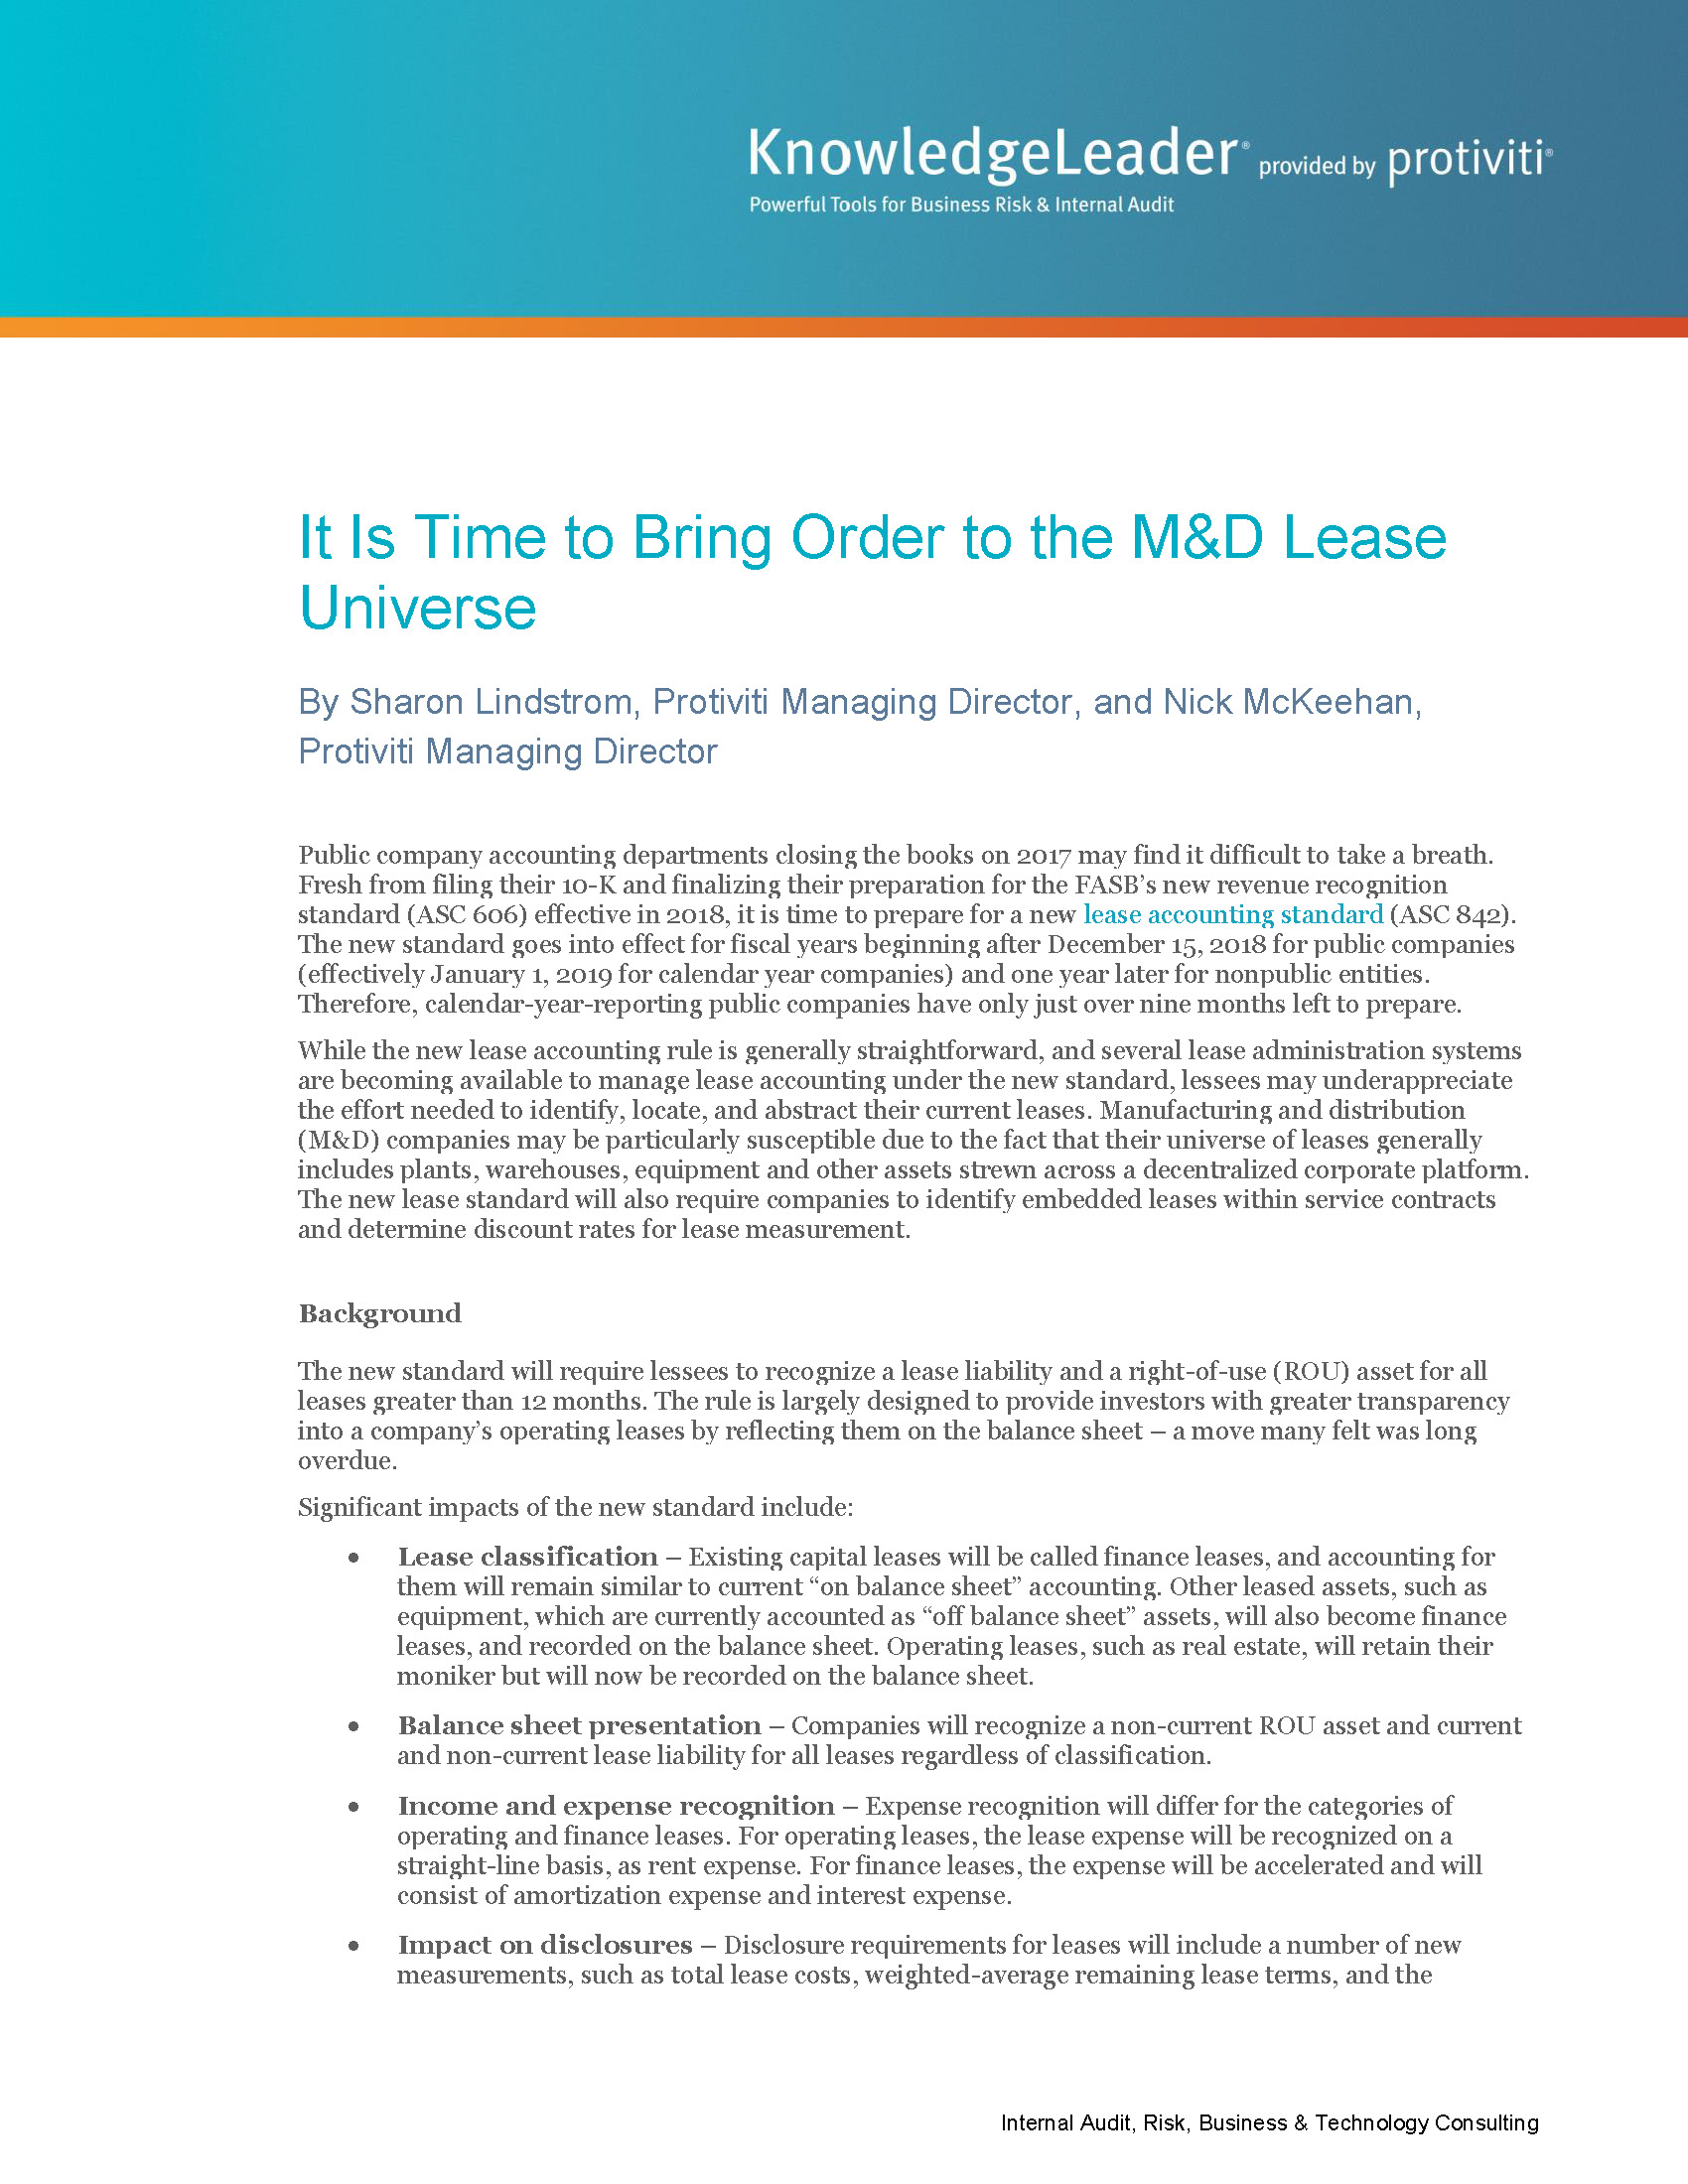 Screenshot of the first page of It Is Time to Bring Order to the M&D Lease Universe